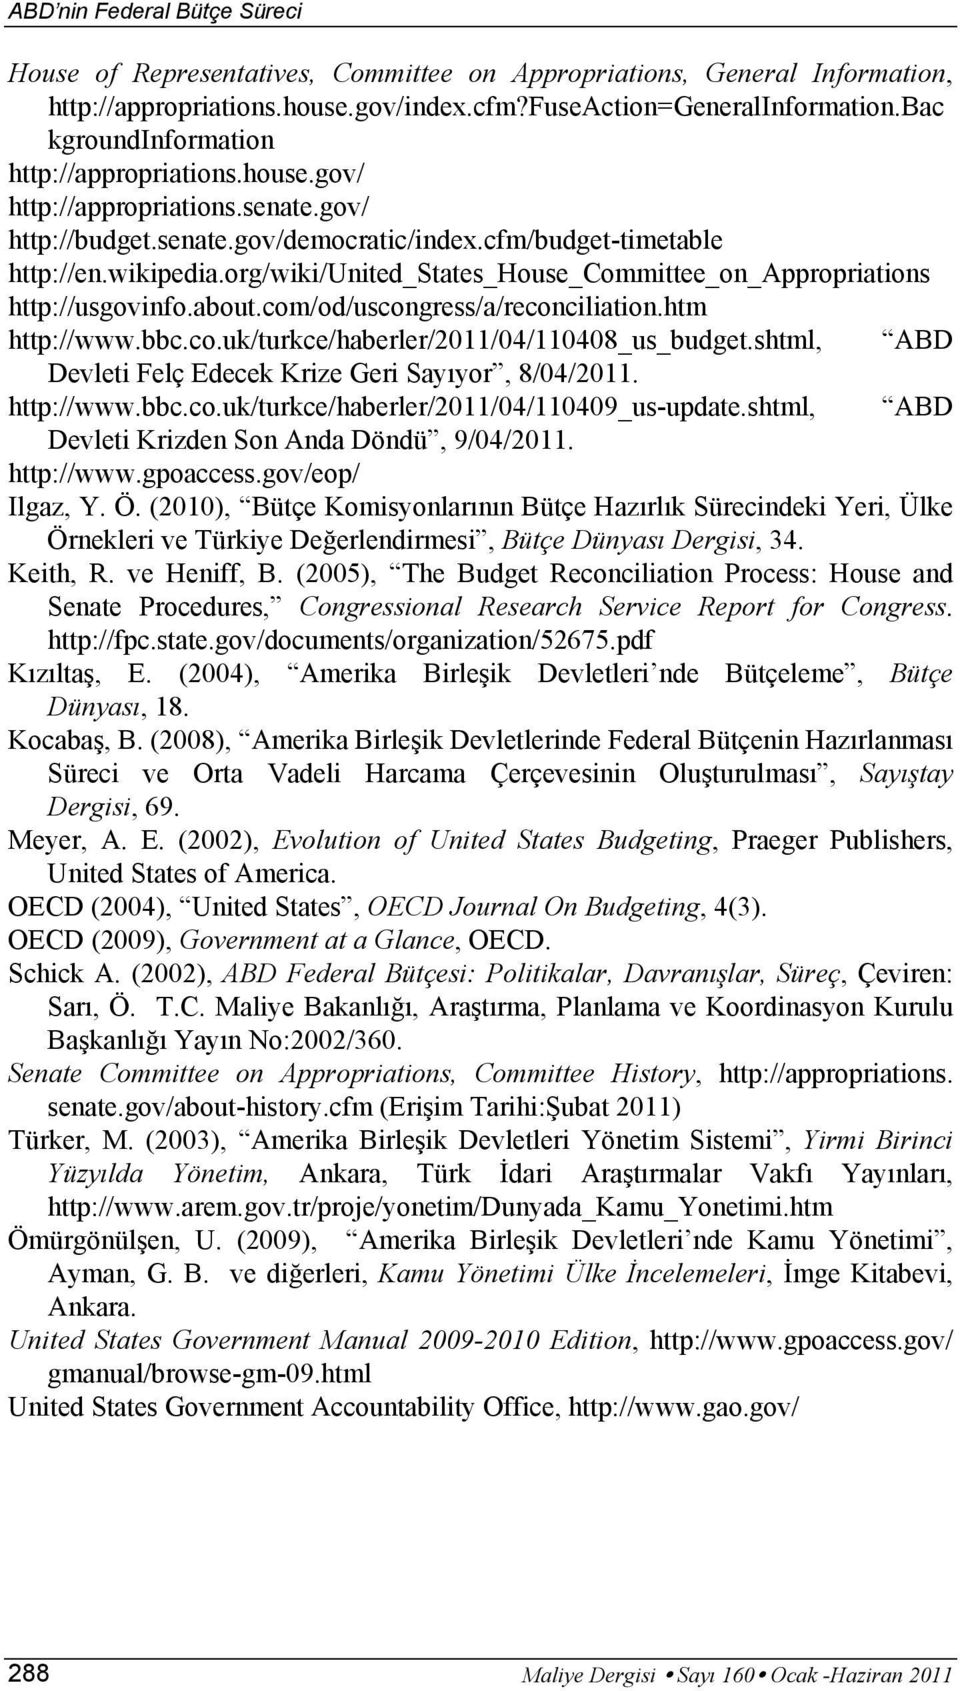 org/wiki/united_states_house_committee_on_appropriations http://usgovinfo.about.com/od/uscongress/a/reconciliation.htm http://www.bbc.co.uk/turkce/haberler/2011/04/110408_us_budget.